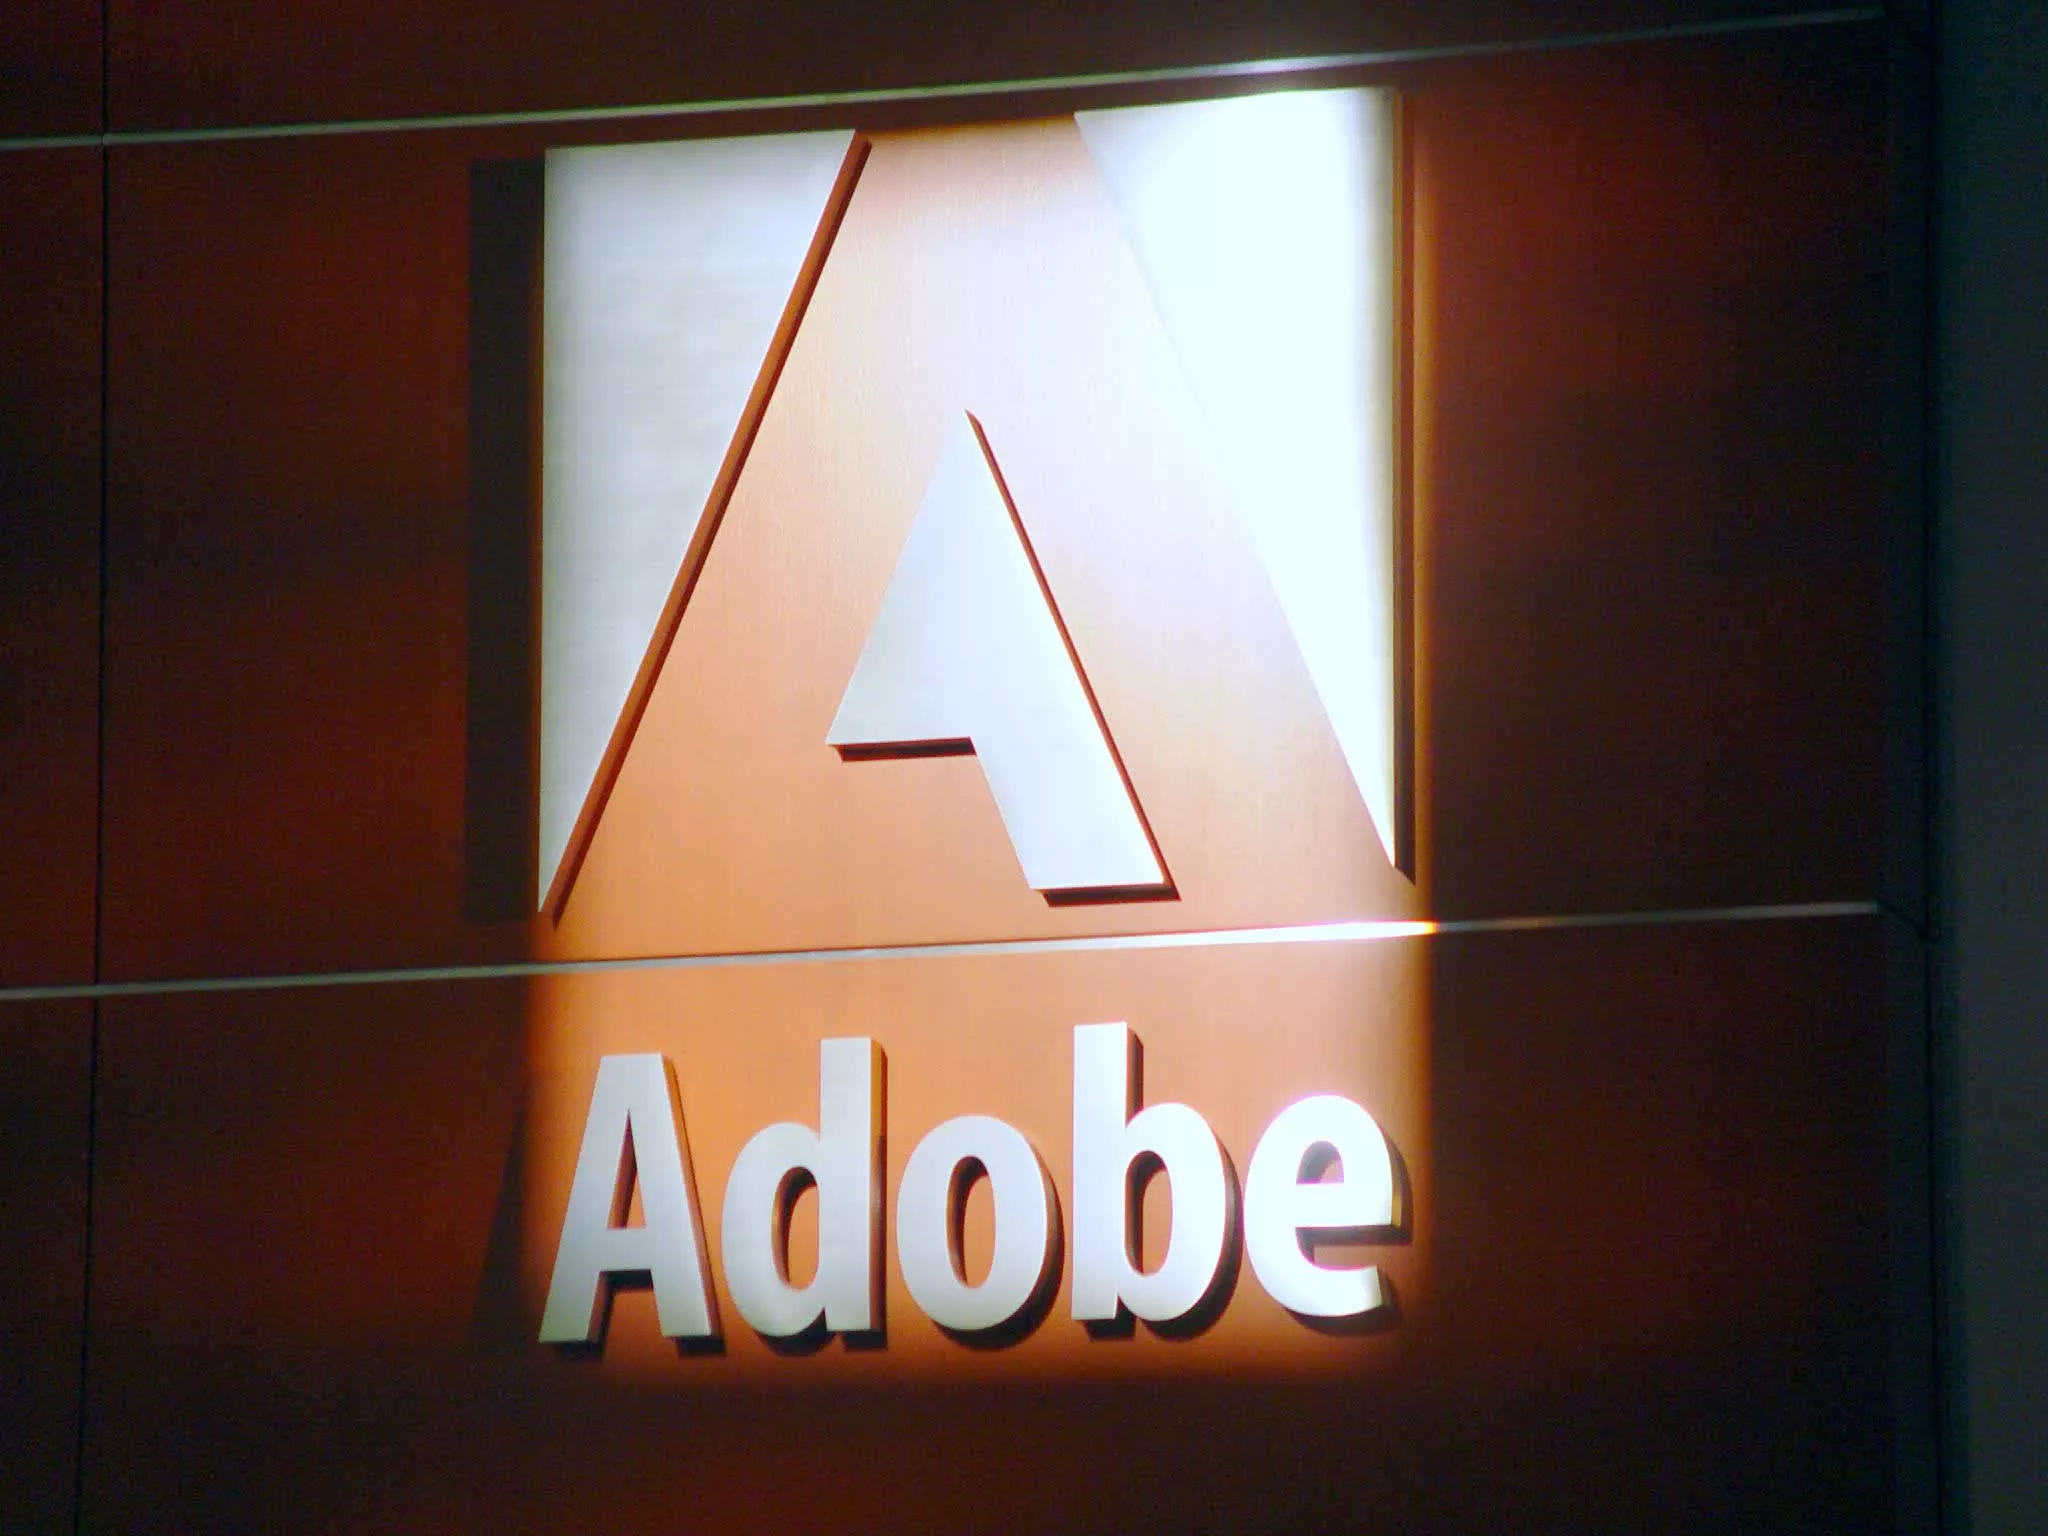 us-government-sues-adobe-over-hidden-subscription-termination-fees-and-difficult-cancellation-process-[techspot]